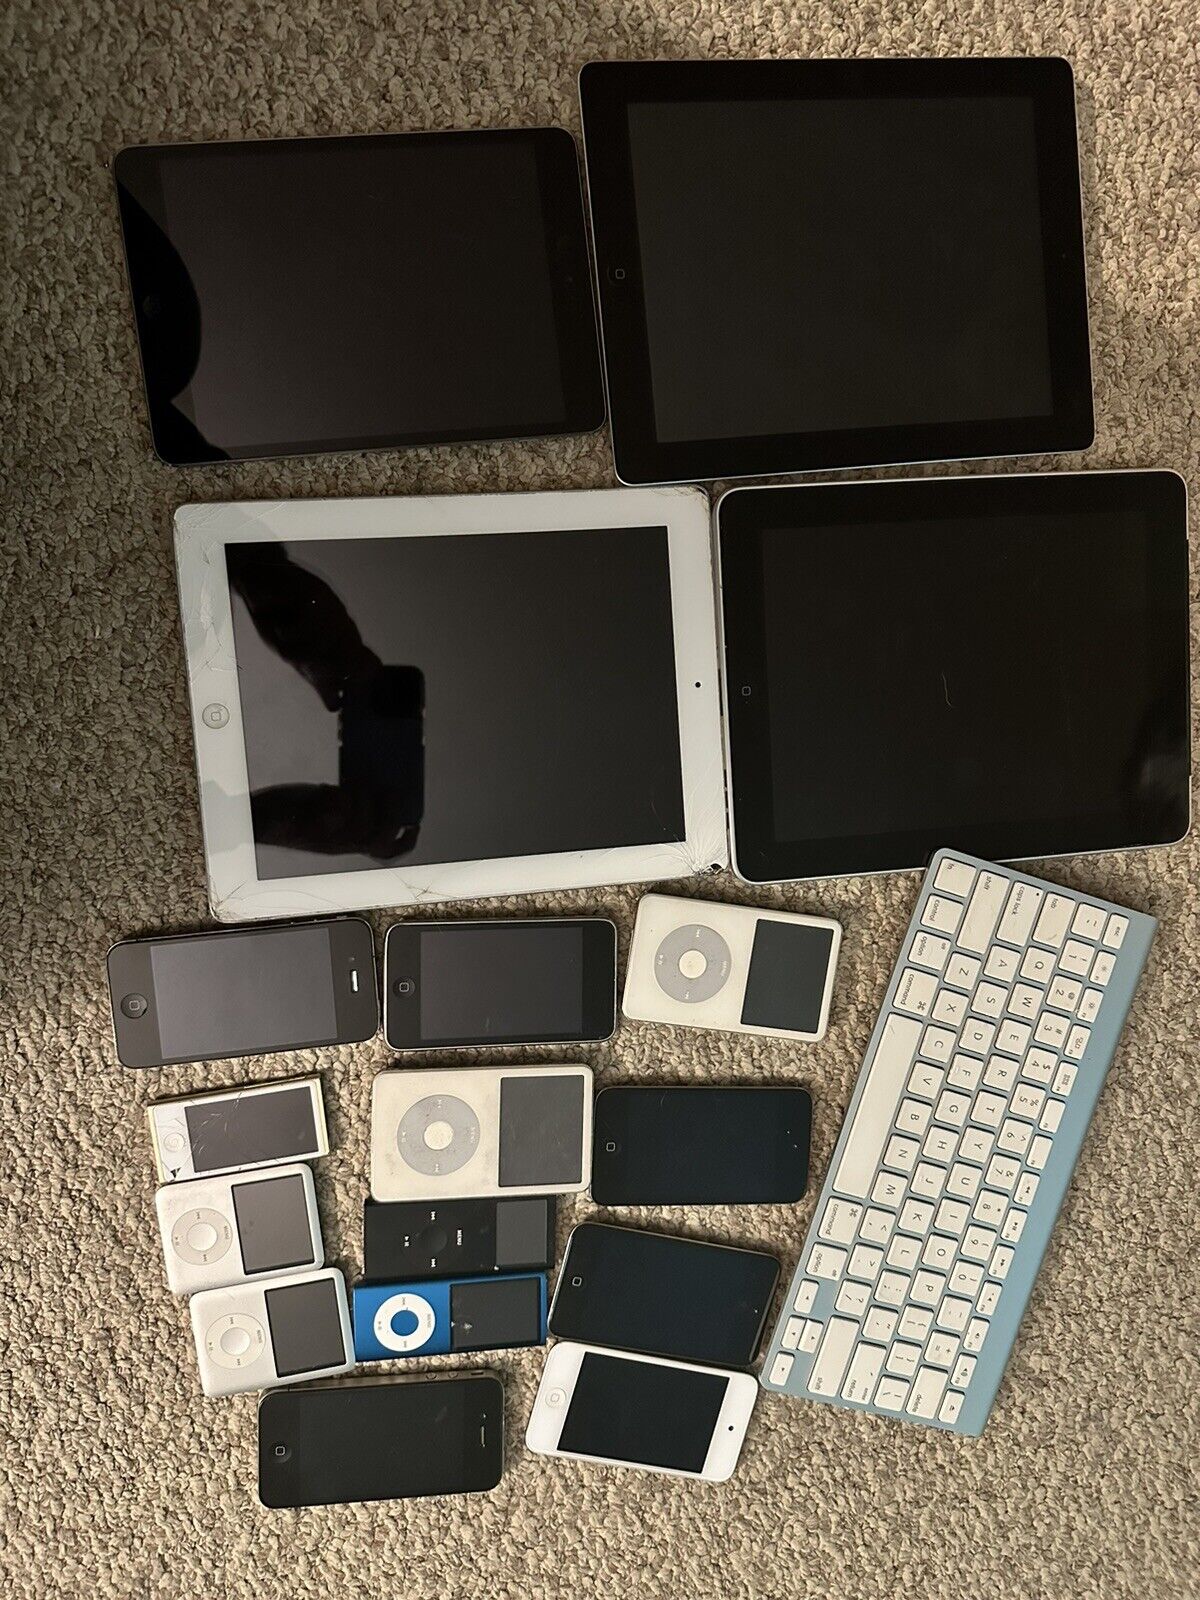 Large Apple iPod/ iPad/ MacBook And Accessories Lot